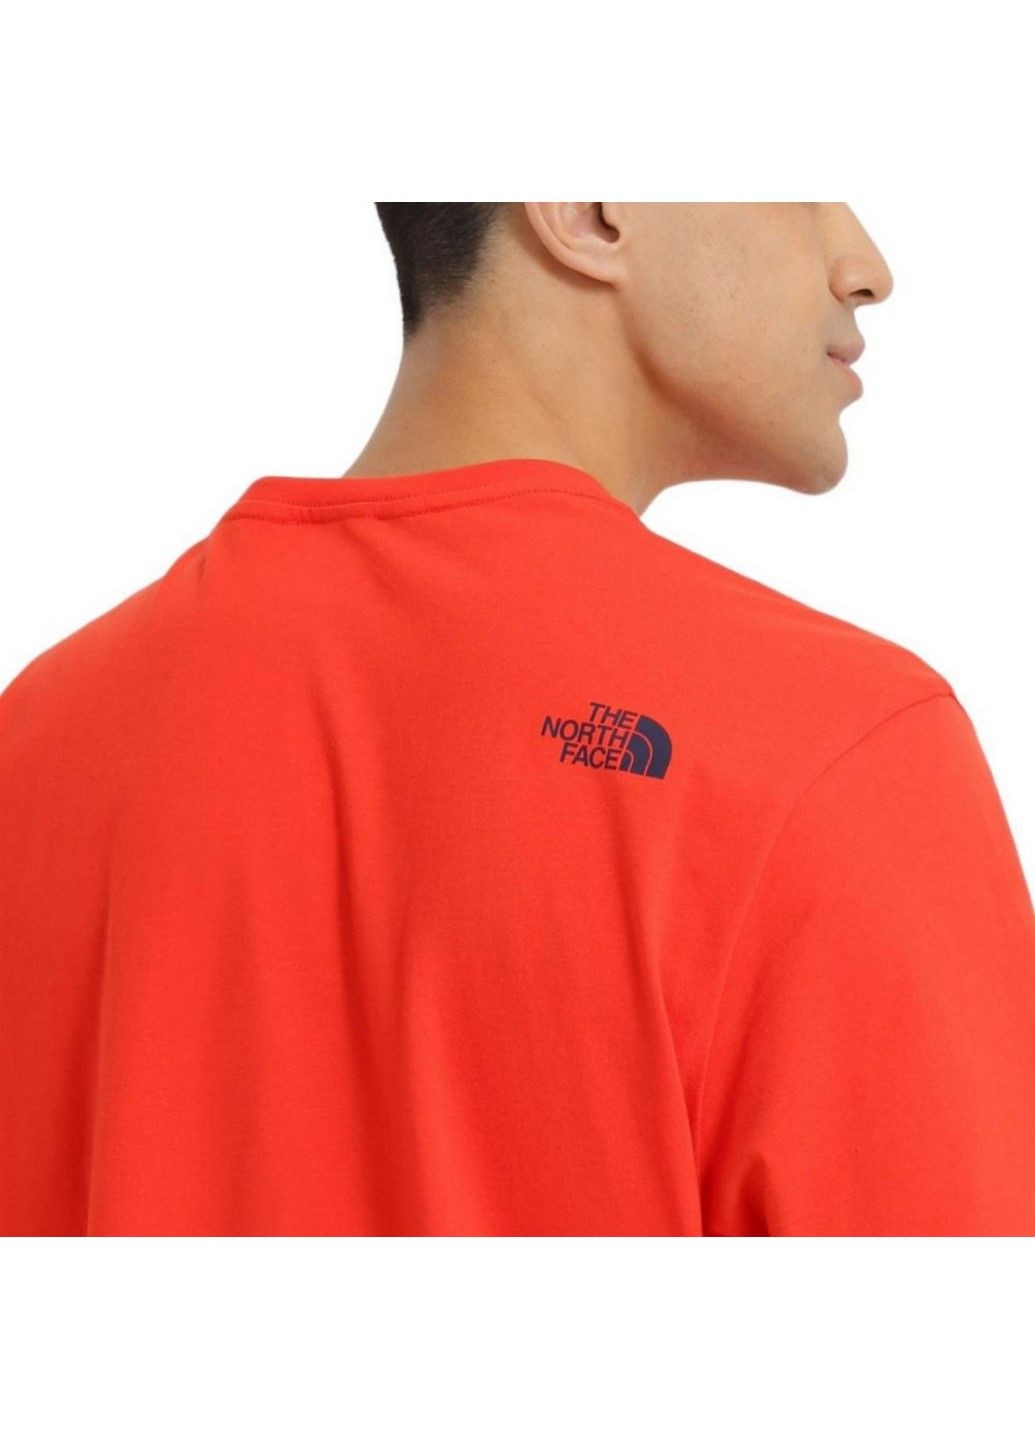 Красная футболка s/s easy tee nf0a2tx315q1 The North Face